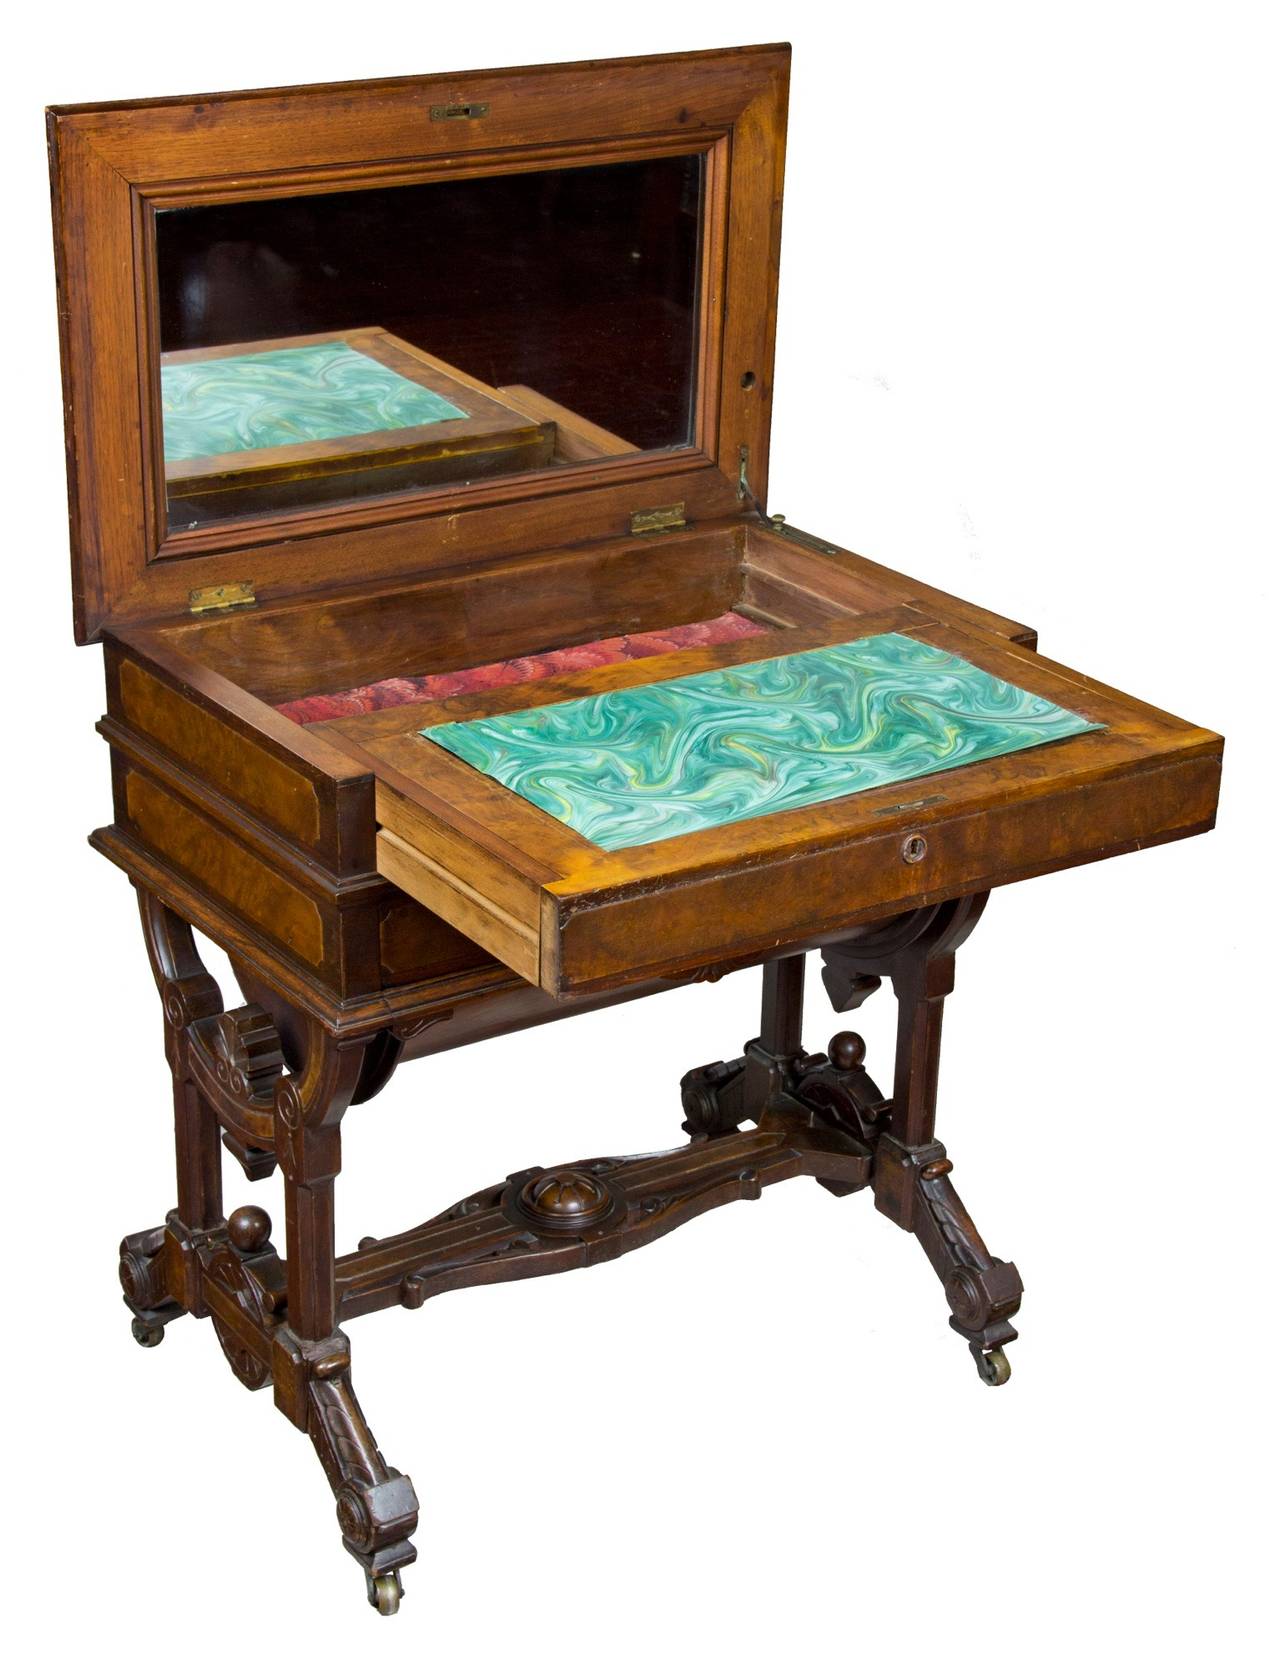 It is rare enough to find pieces such as this with their original label in place and rarer still to find them also with a first surface. This worktable/sewing cabinet is a tour de force with a mirror under a marquetry lid with pull-out writing